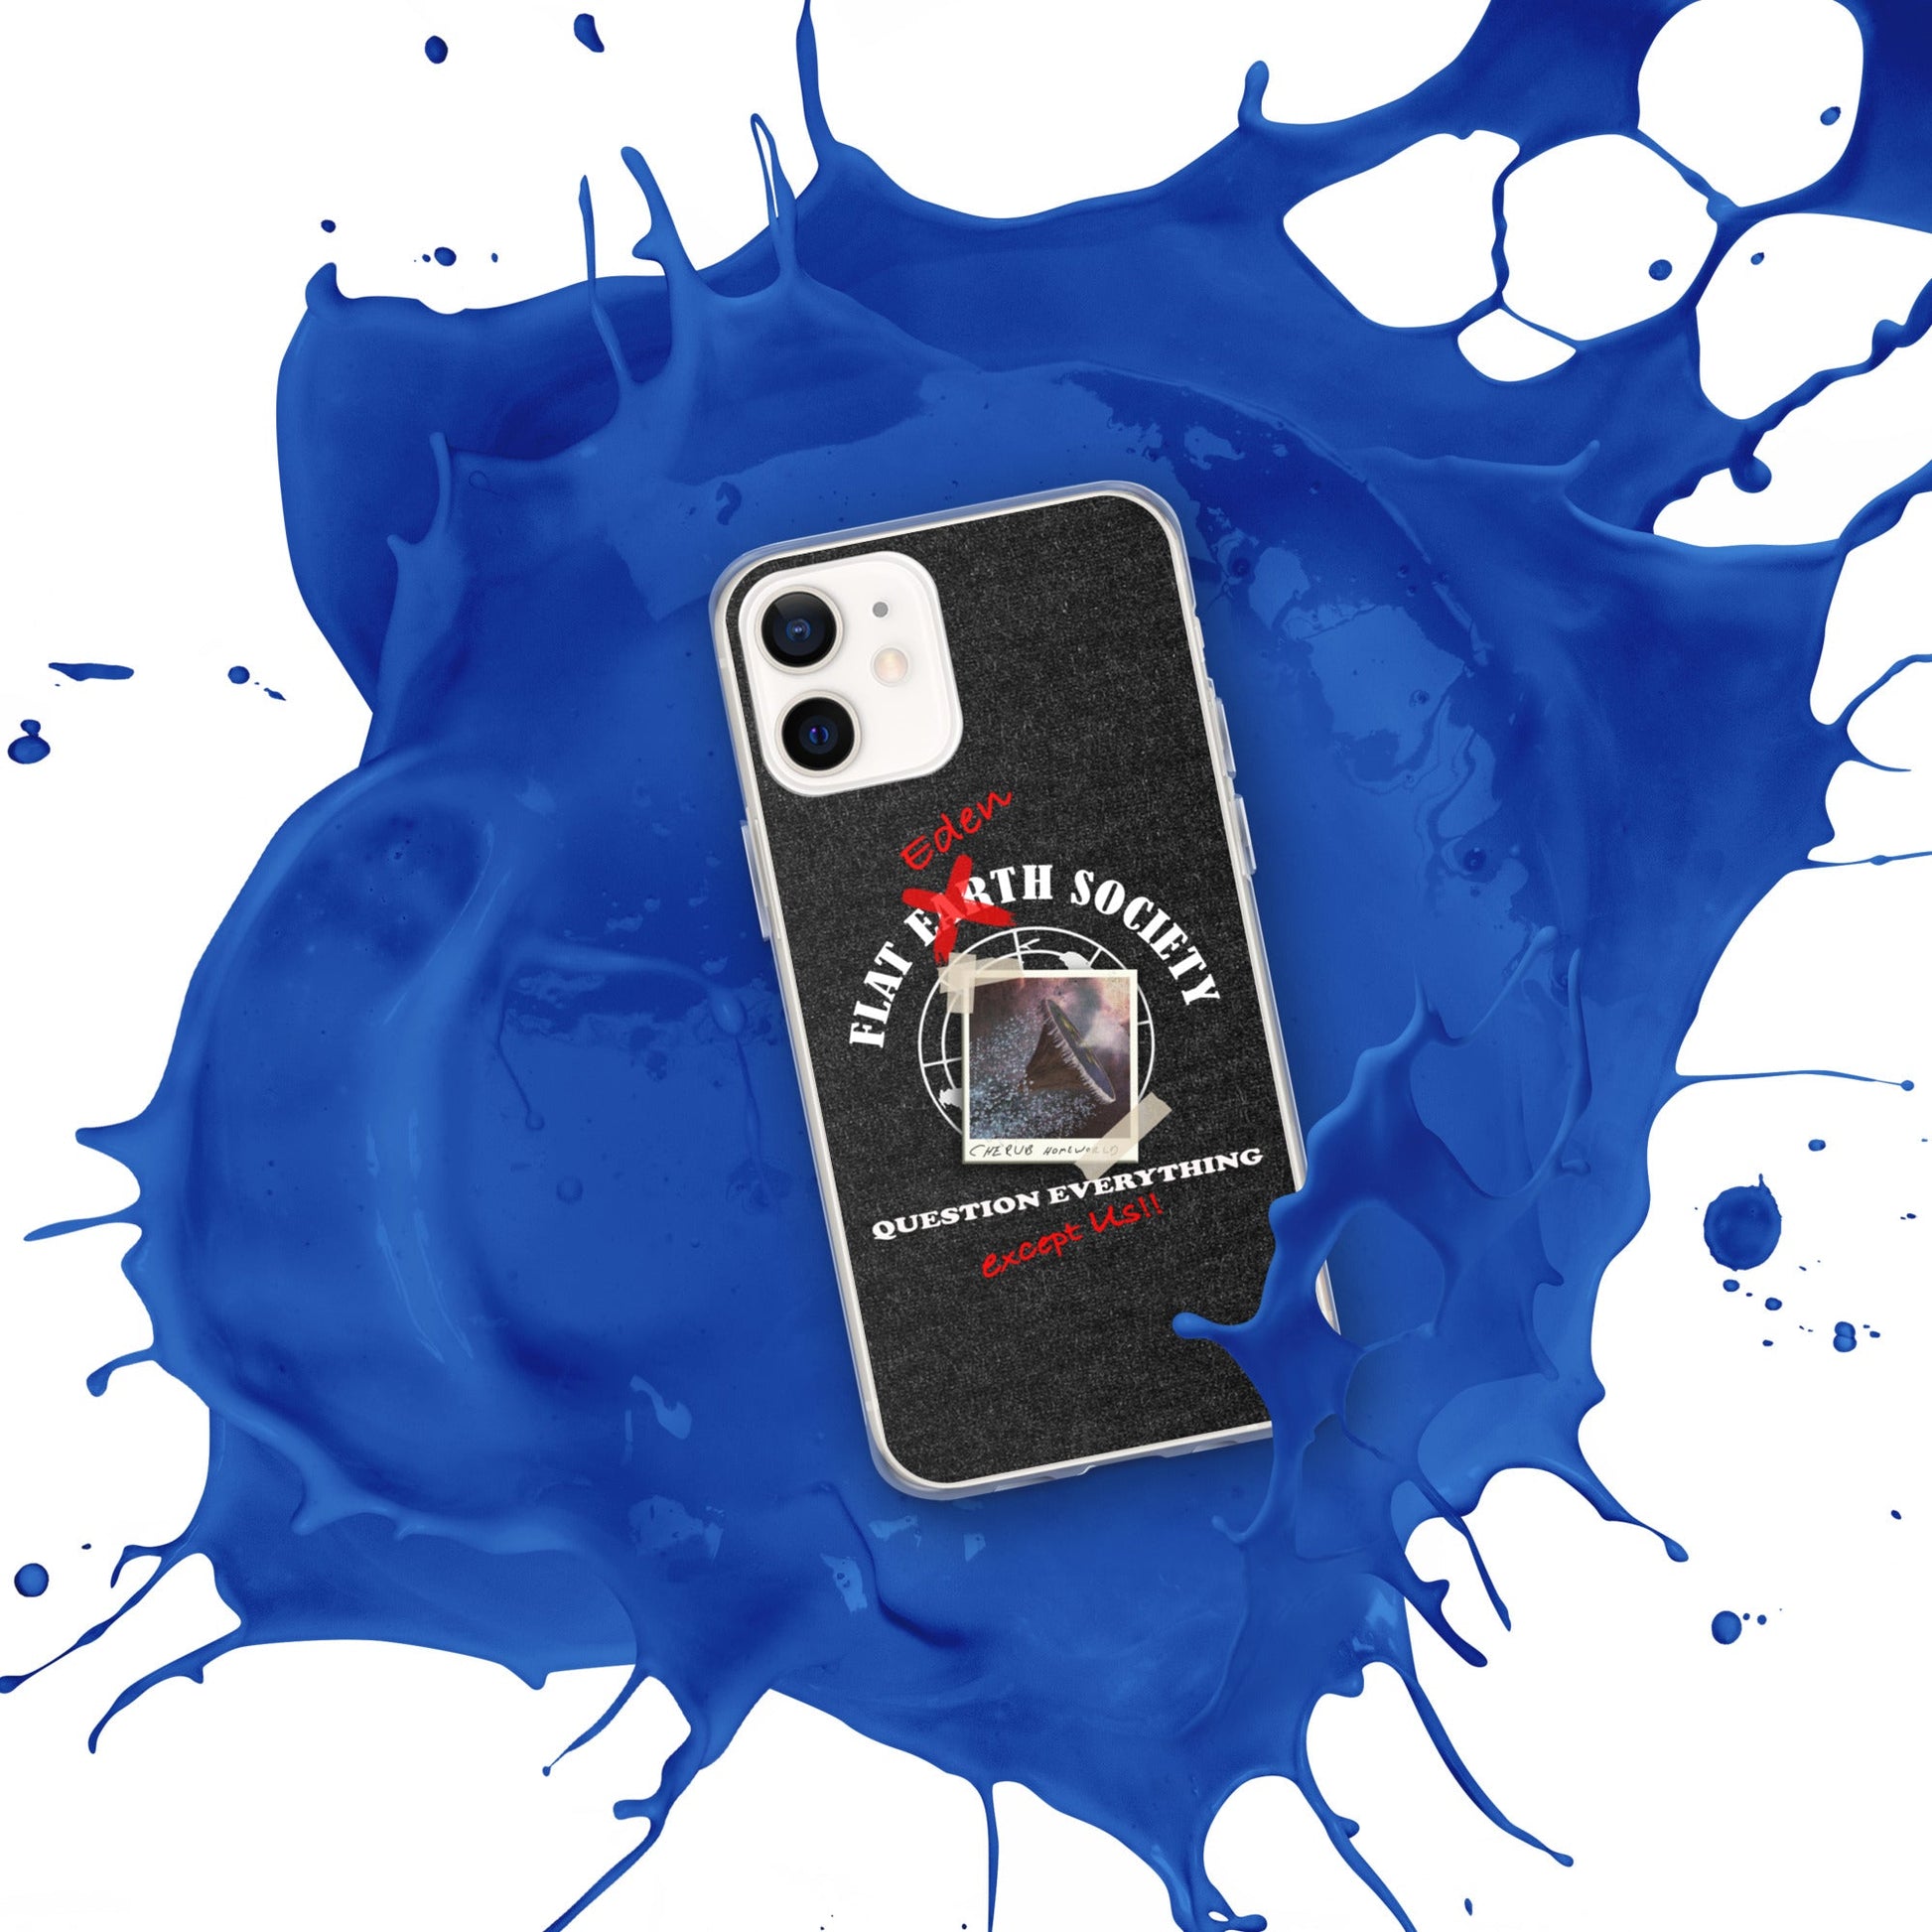 iPhone Case | Intergalactic Space Force 2 | Flat Eden Society - Spectral Ink Shop - Mobile Phone Cases -9780728_11703